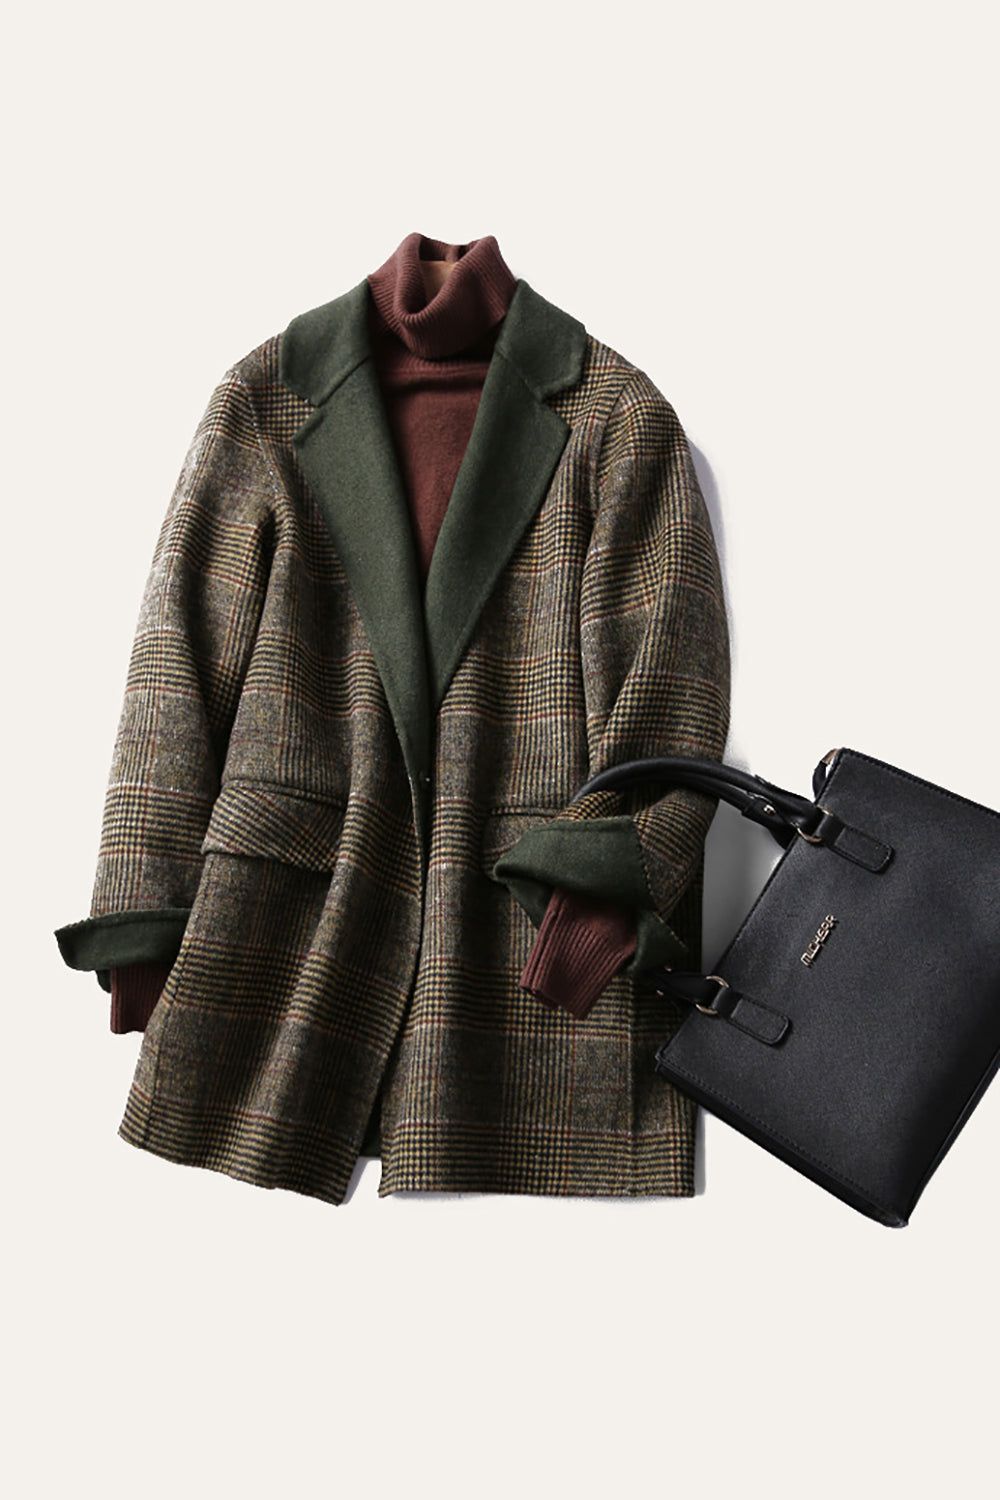 Latest trends of wool coats to look stylish